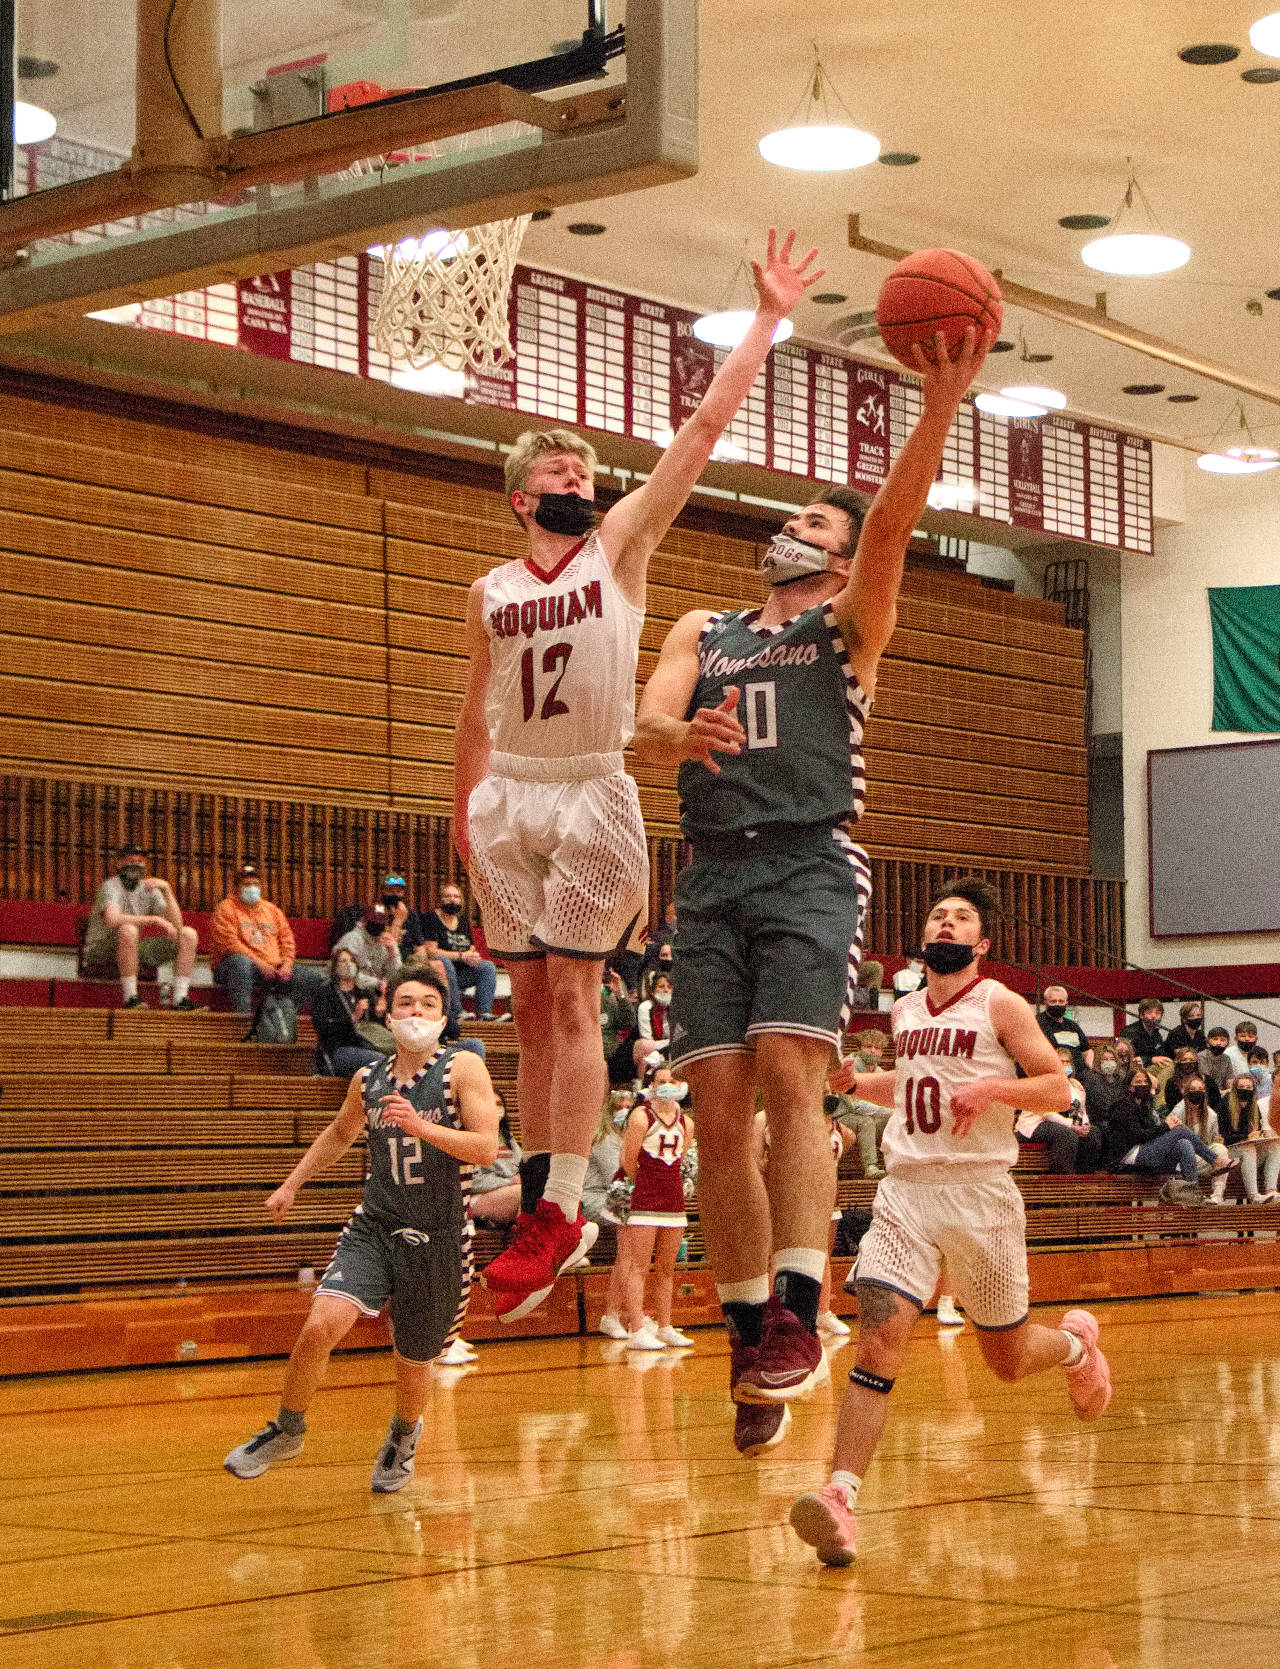 RYAN SPARKS | THE DAILY WORLD Montesano’s Trace Ridgway (10) drives to the hoop against Hoquiam’s Michael Lorton-Watkins (12) during the first half of Montesano’s 55-45 victory on Tuesday at Hoquiam Square Garden. Ridgway led all scorers with 24 points in the game.